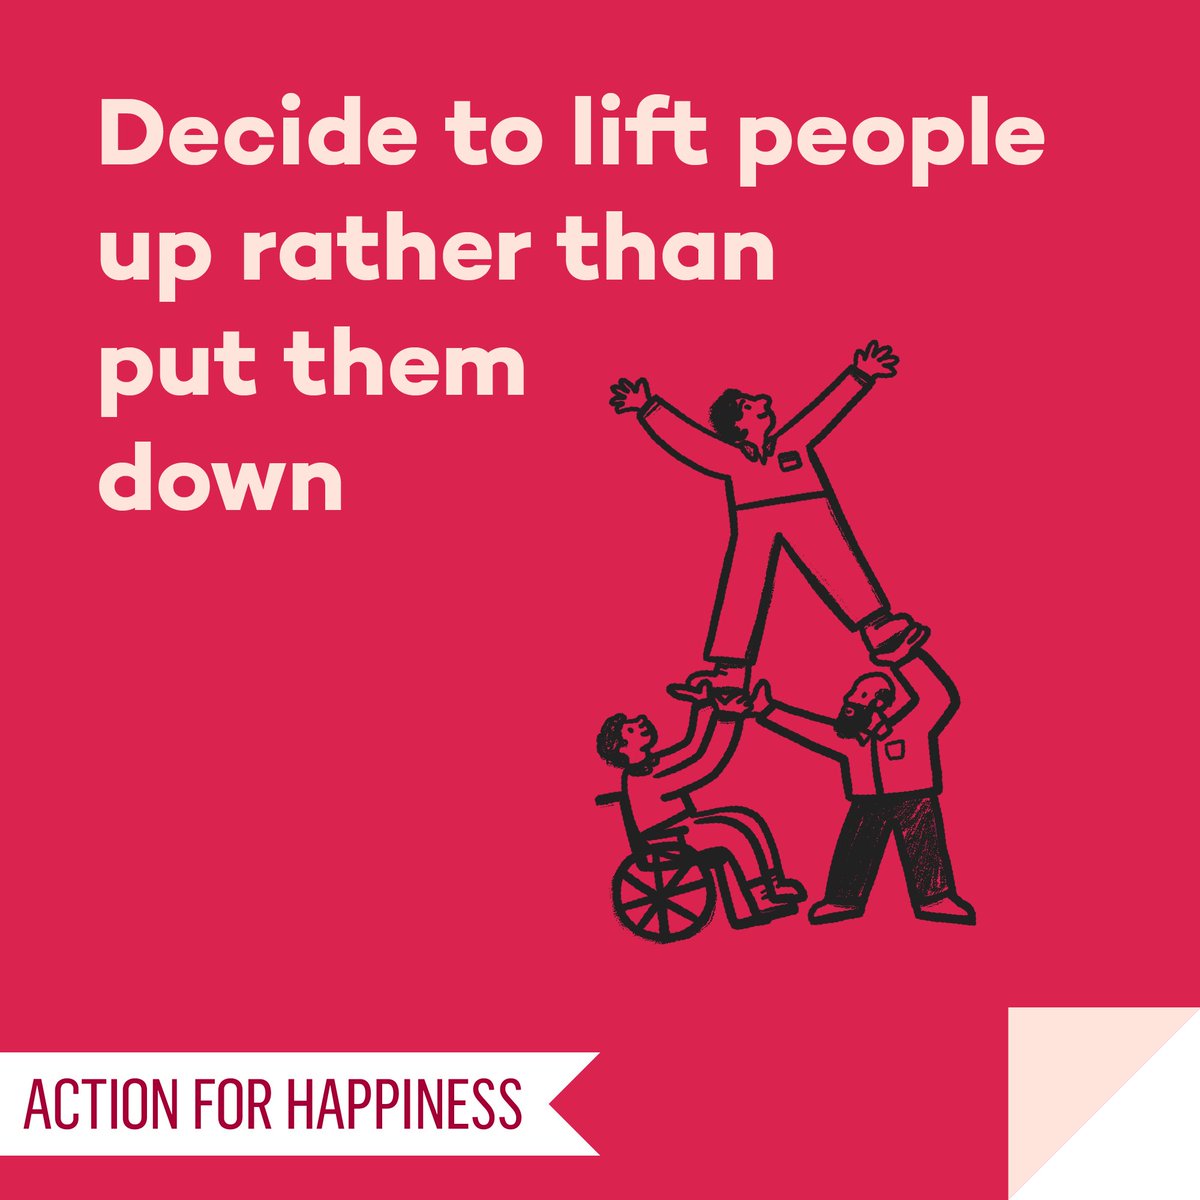 Happier January - Day 25: Decide to lift people up rather than put them down actionforhappiness.org/january #HappierJanuary